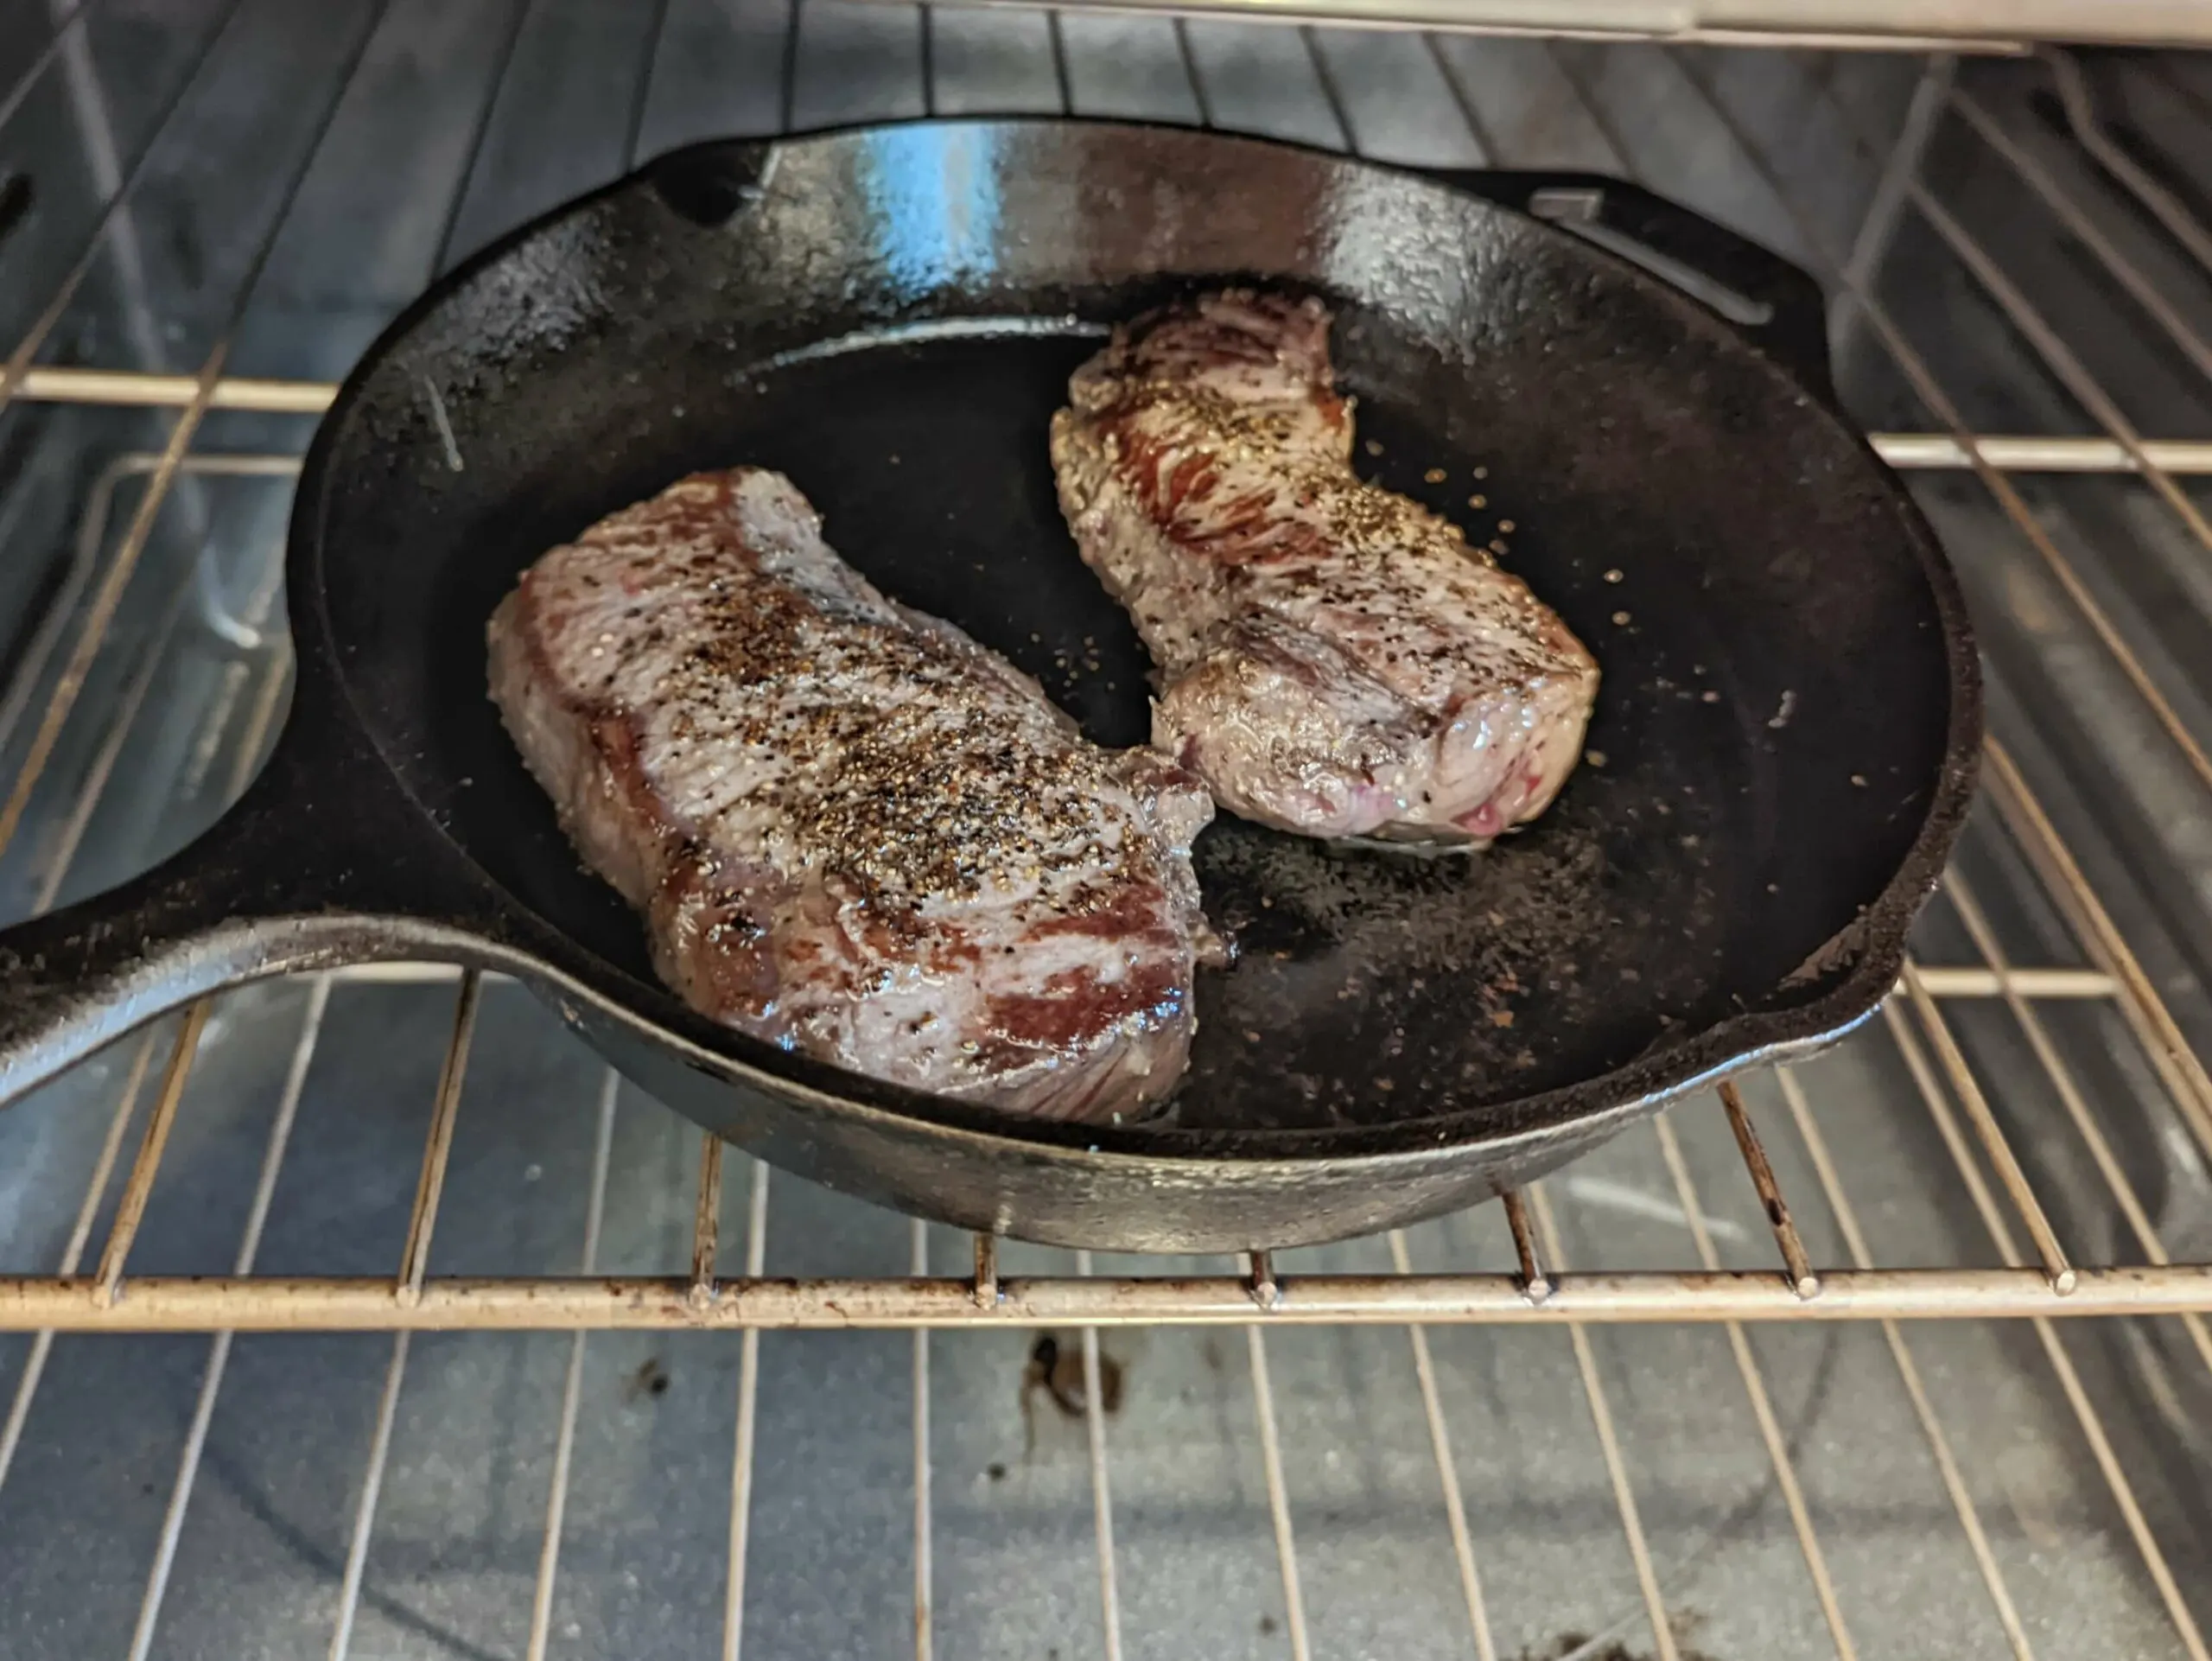 Steak cooking in a cast-iron skillet in the oven.